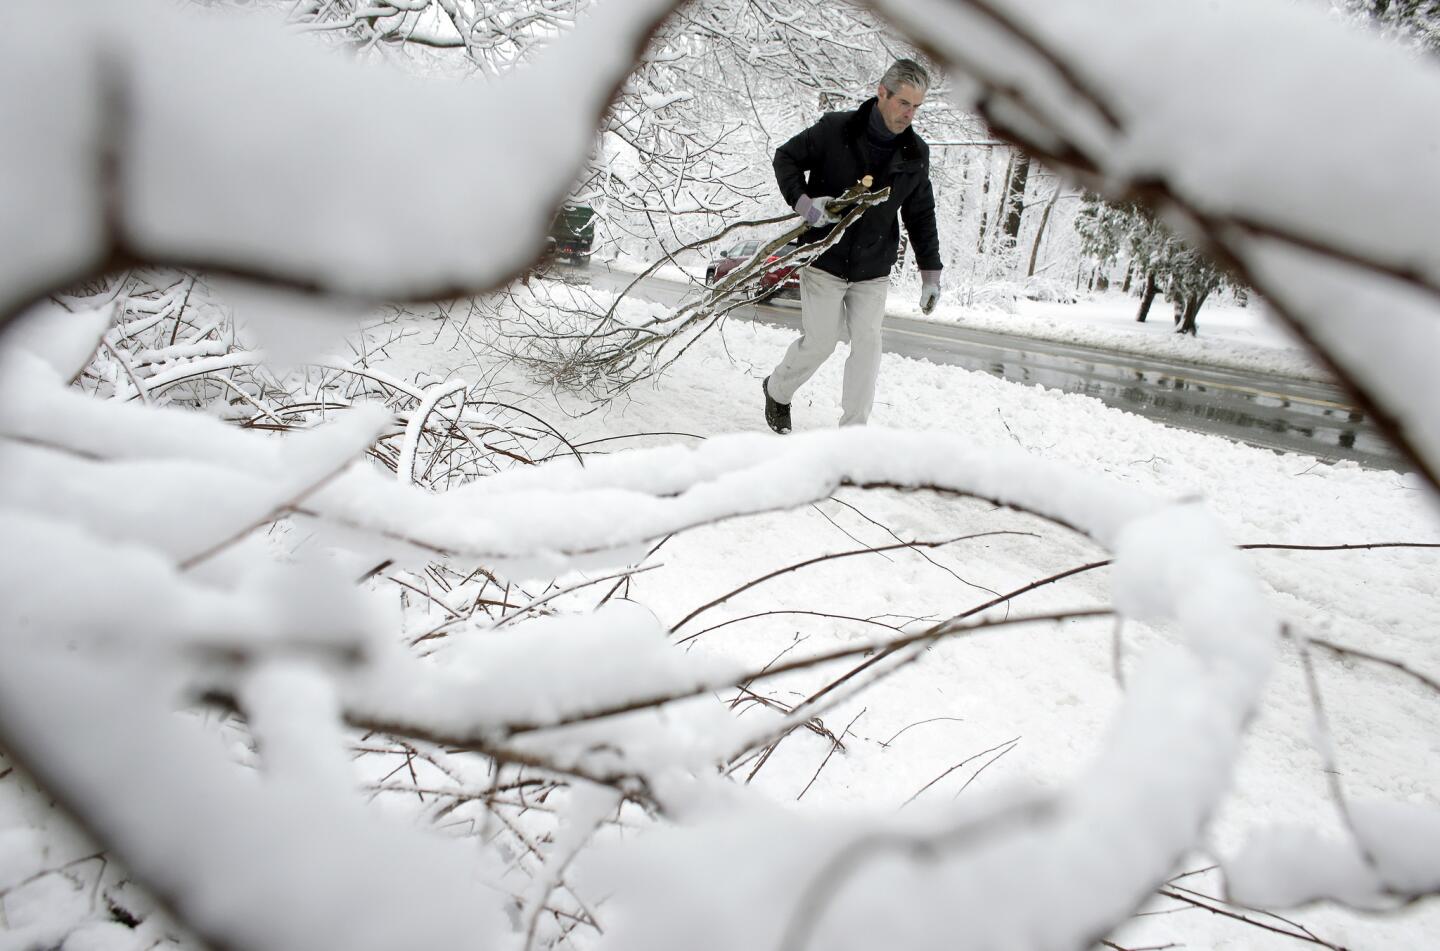 Kevin Crowley removes broken tree branches from a driveway in Sherborn, Mass., on March 8. For the second time in less than a week, a storm rolled into the Northeast with wet, heavy snow.